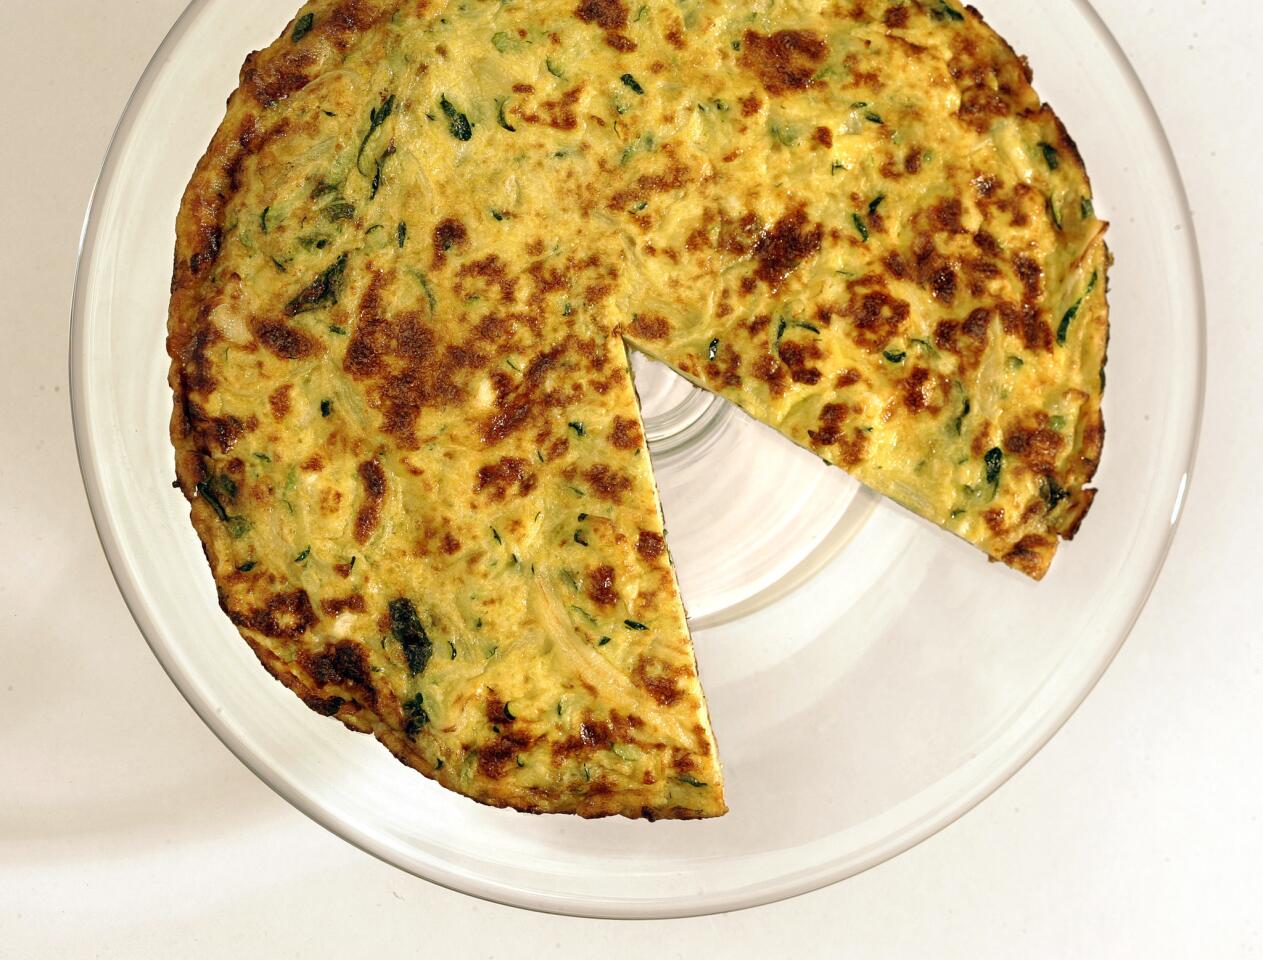 For something a bit more savory, try a zucchini-basil frittata. Click here for the recipe.